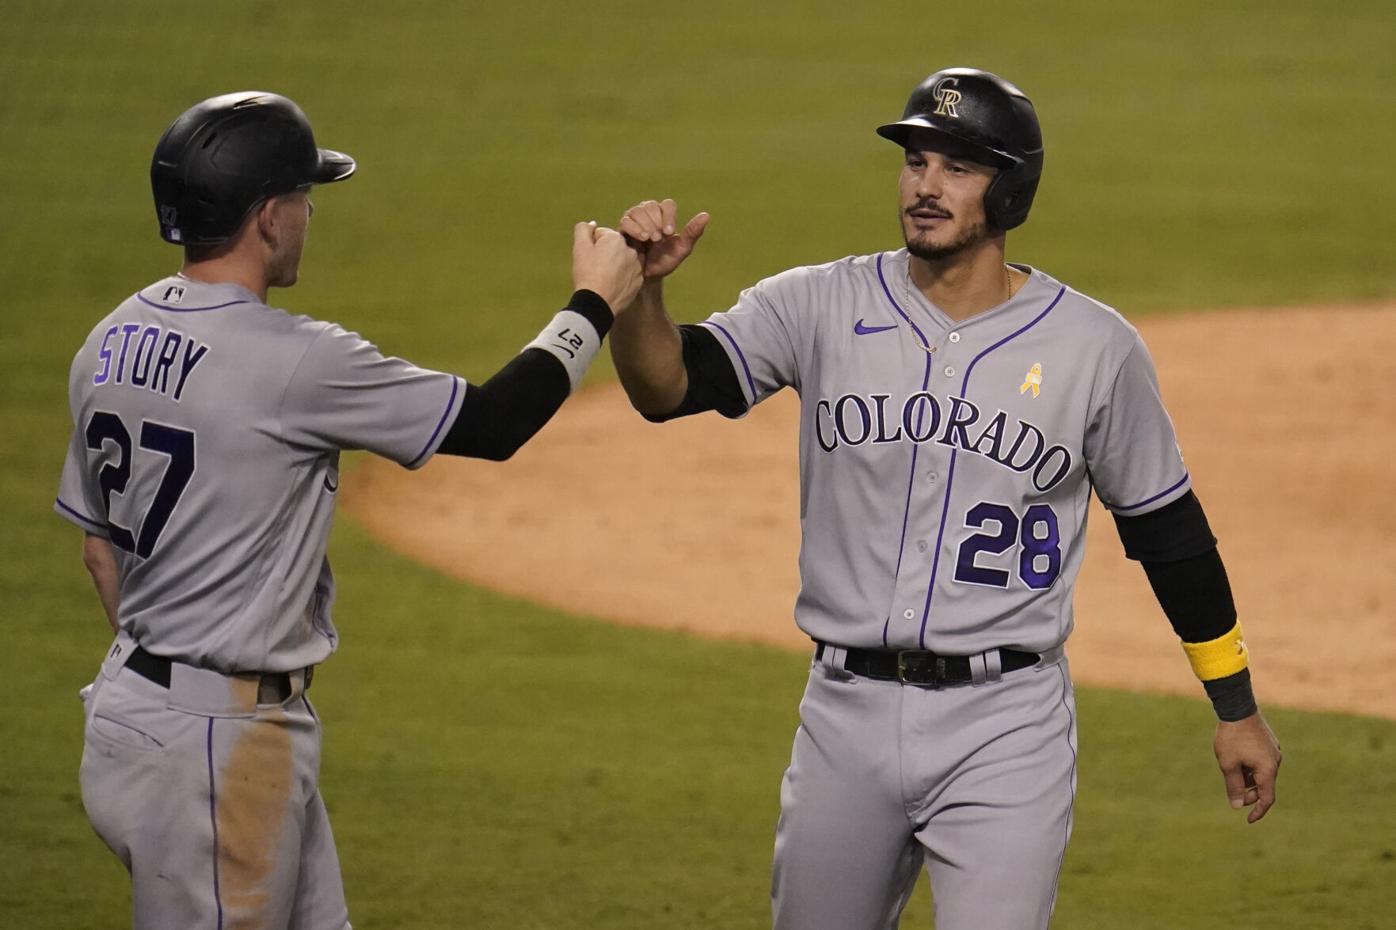 Woody Paige: Astonishing achievement for Nolan Arenado and the Rockies  worth a pause to ponder, Sports